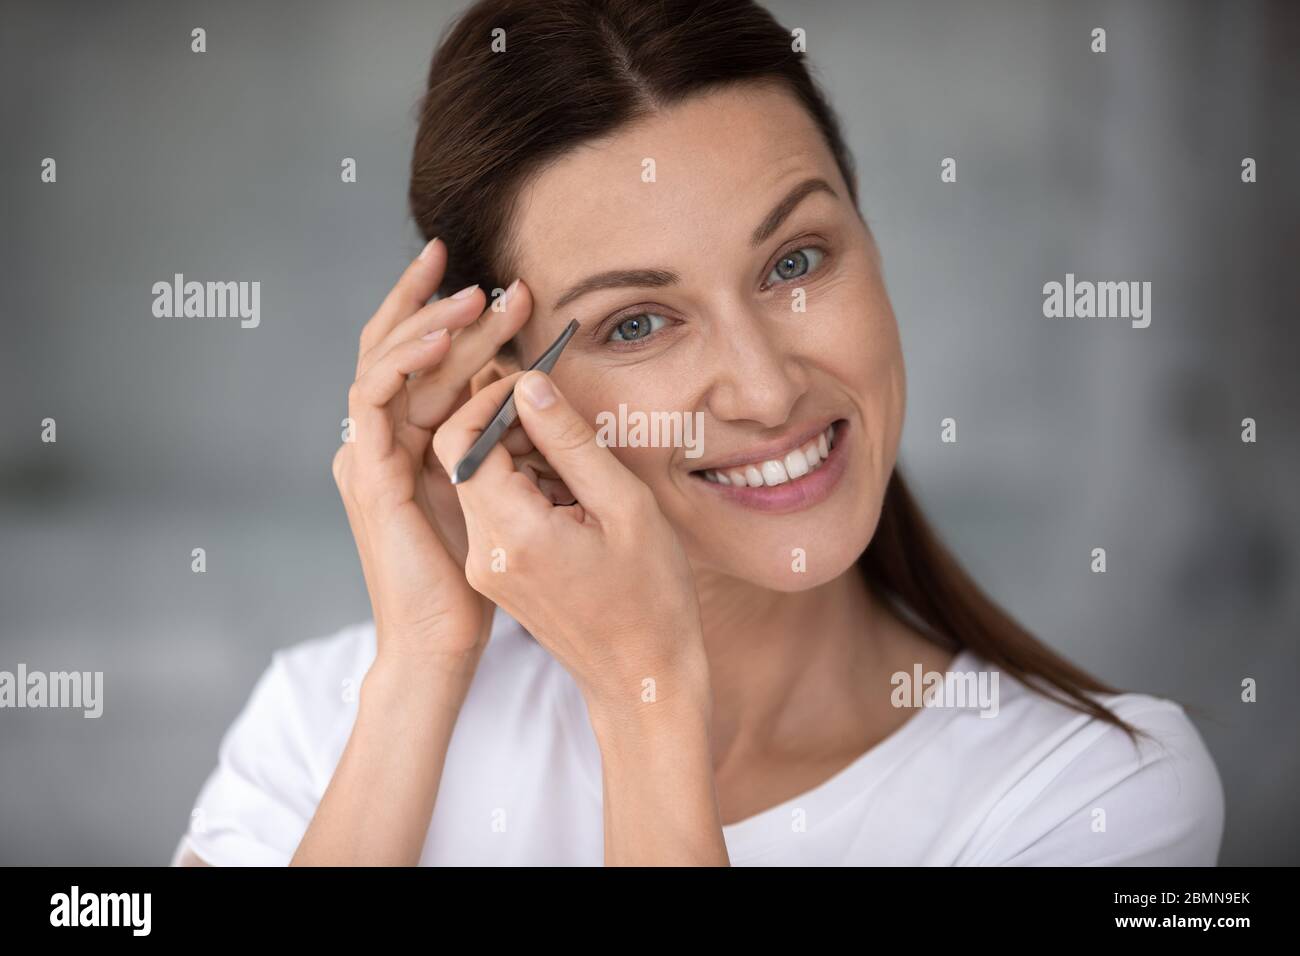 Close up portrait young adult woman holding tweezers pluck eyebrows Stock Photo